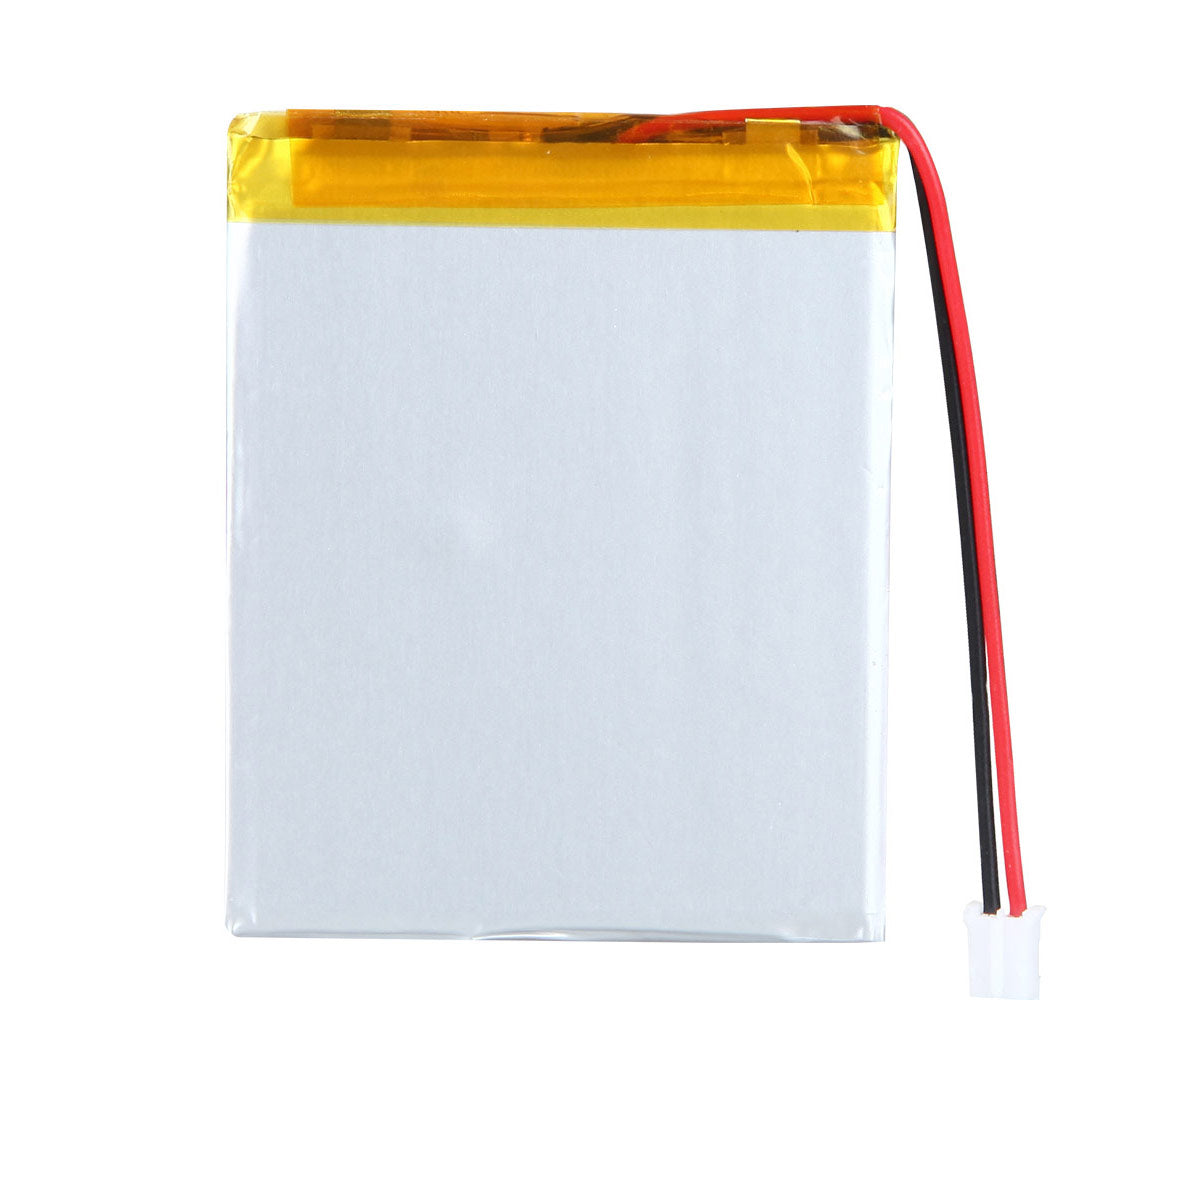 3.7V 1100mAh 354860 Rechargeable Lithium Polymer Battery